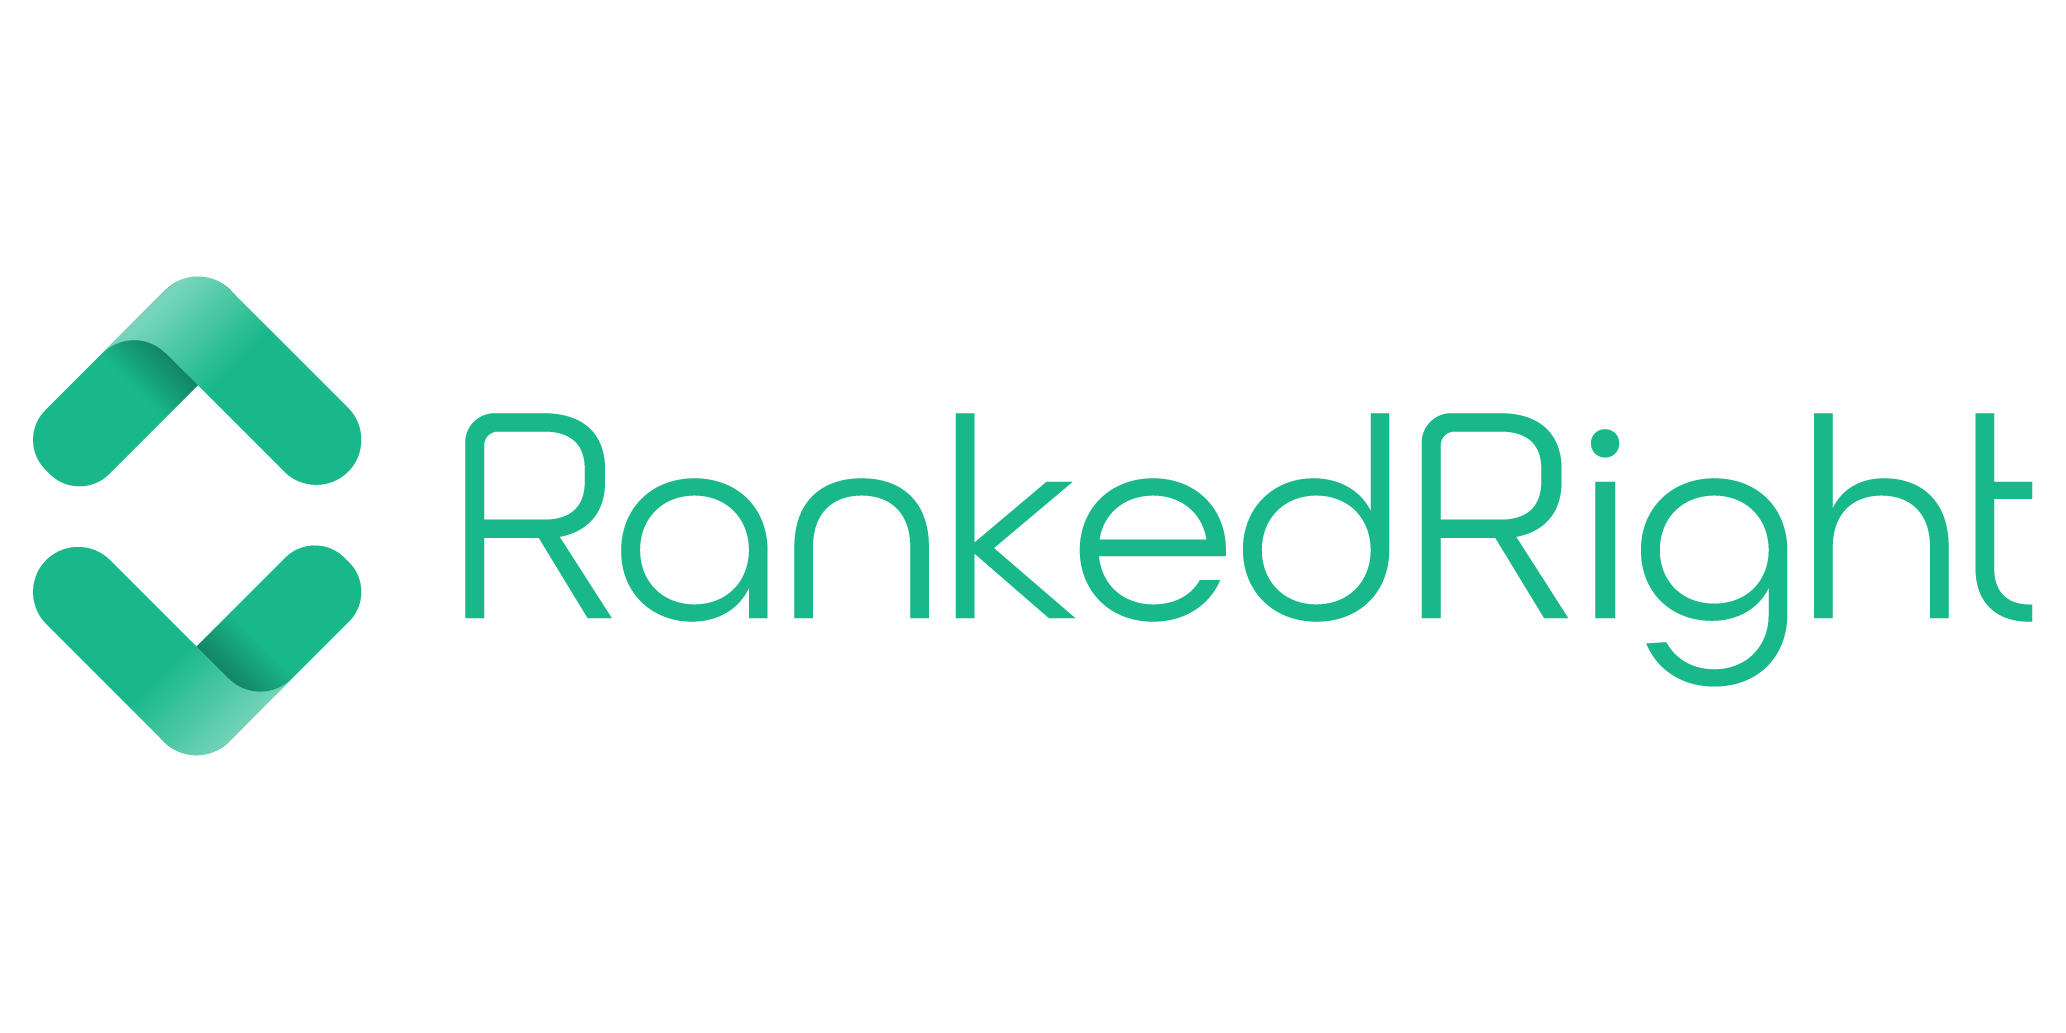 New Cyber Vulnerability Ranking Platform Secures $500K in Seed Funding